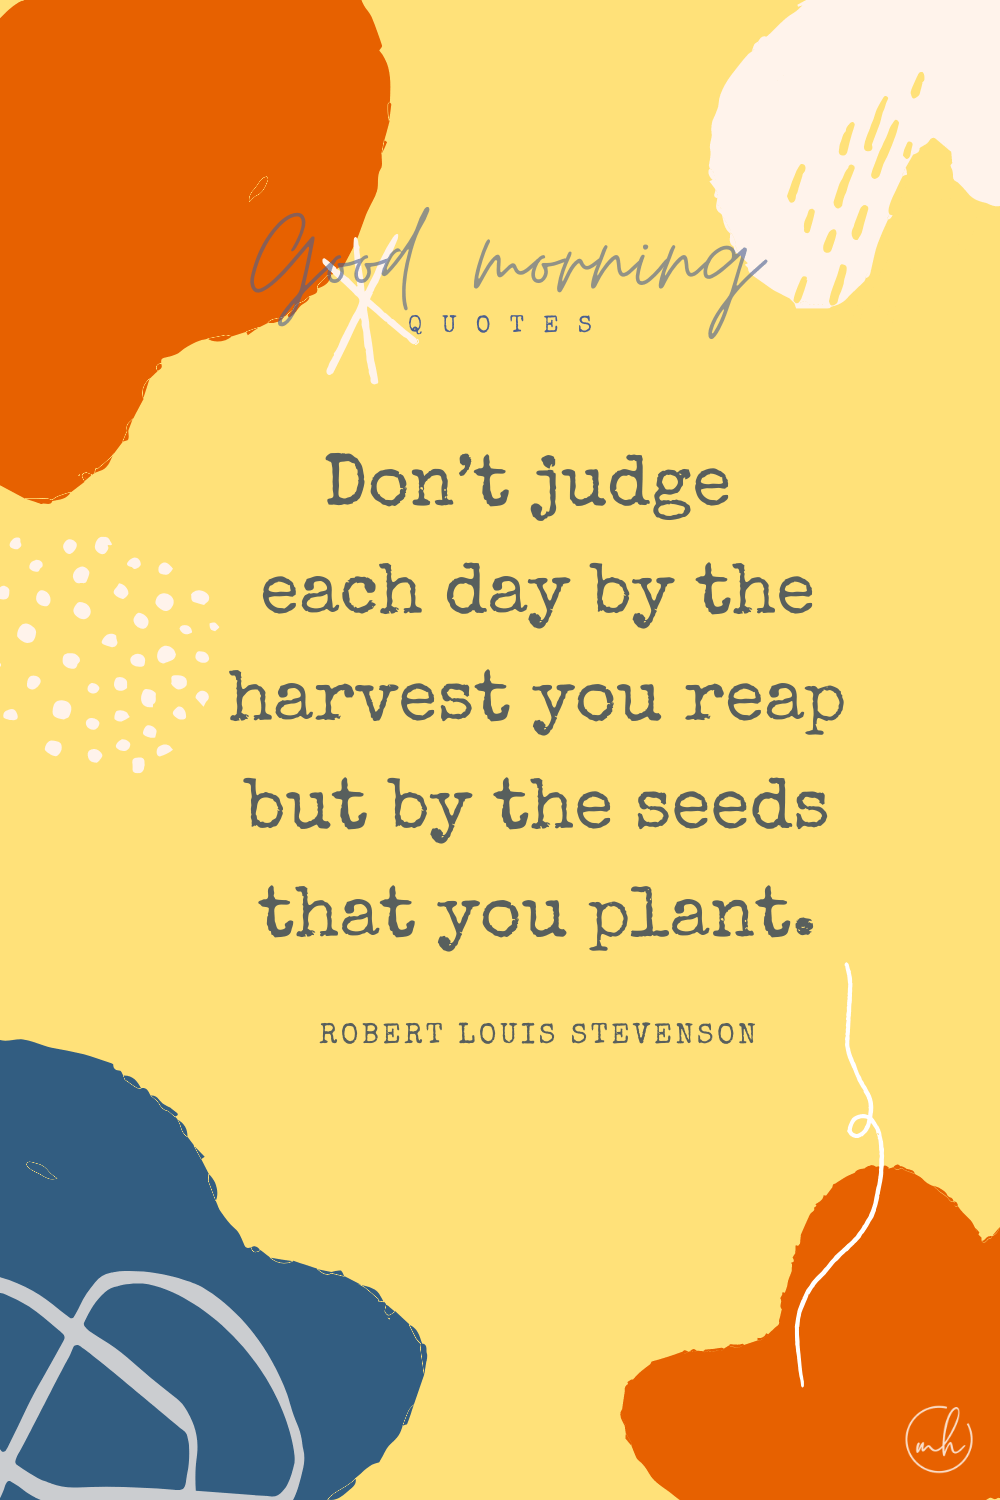 "Don’t judge each day by the harvest you reap but by the seeds that you plant." — Robert Louis Stevenson